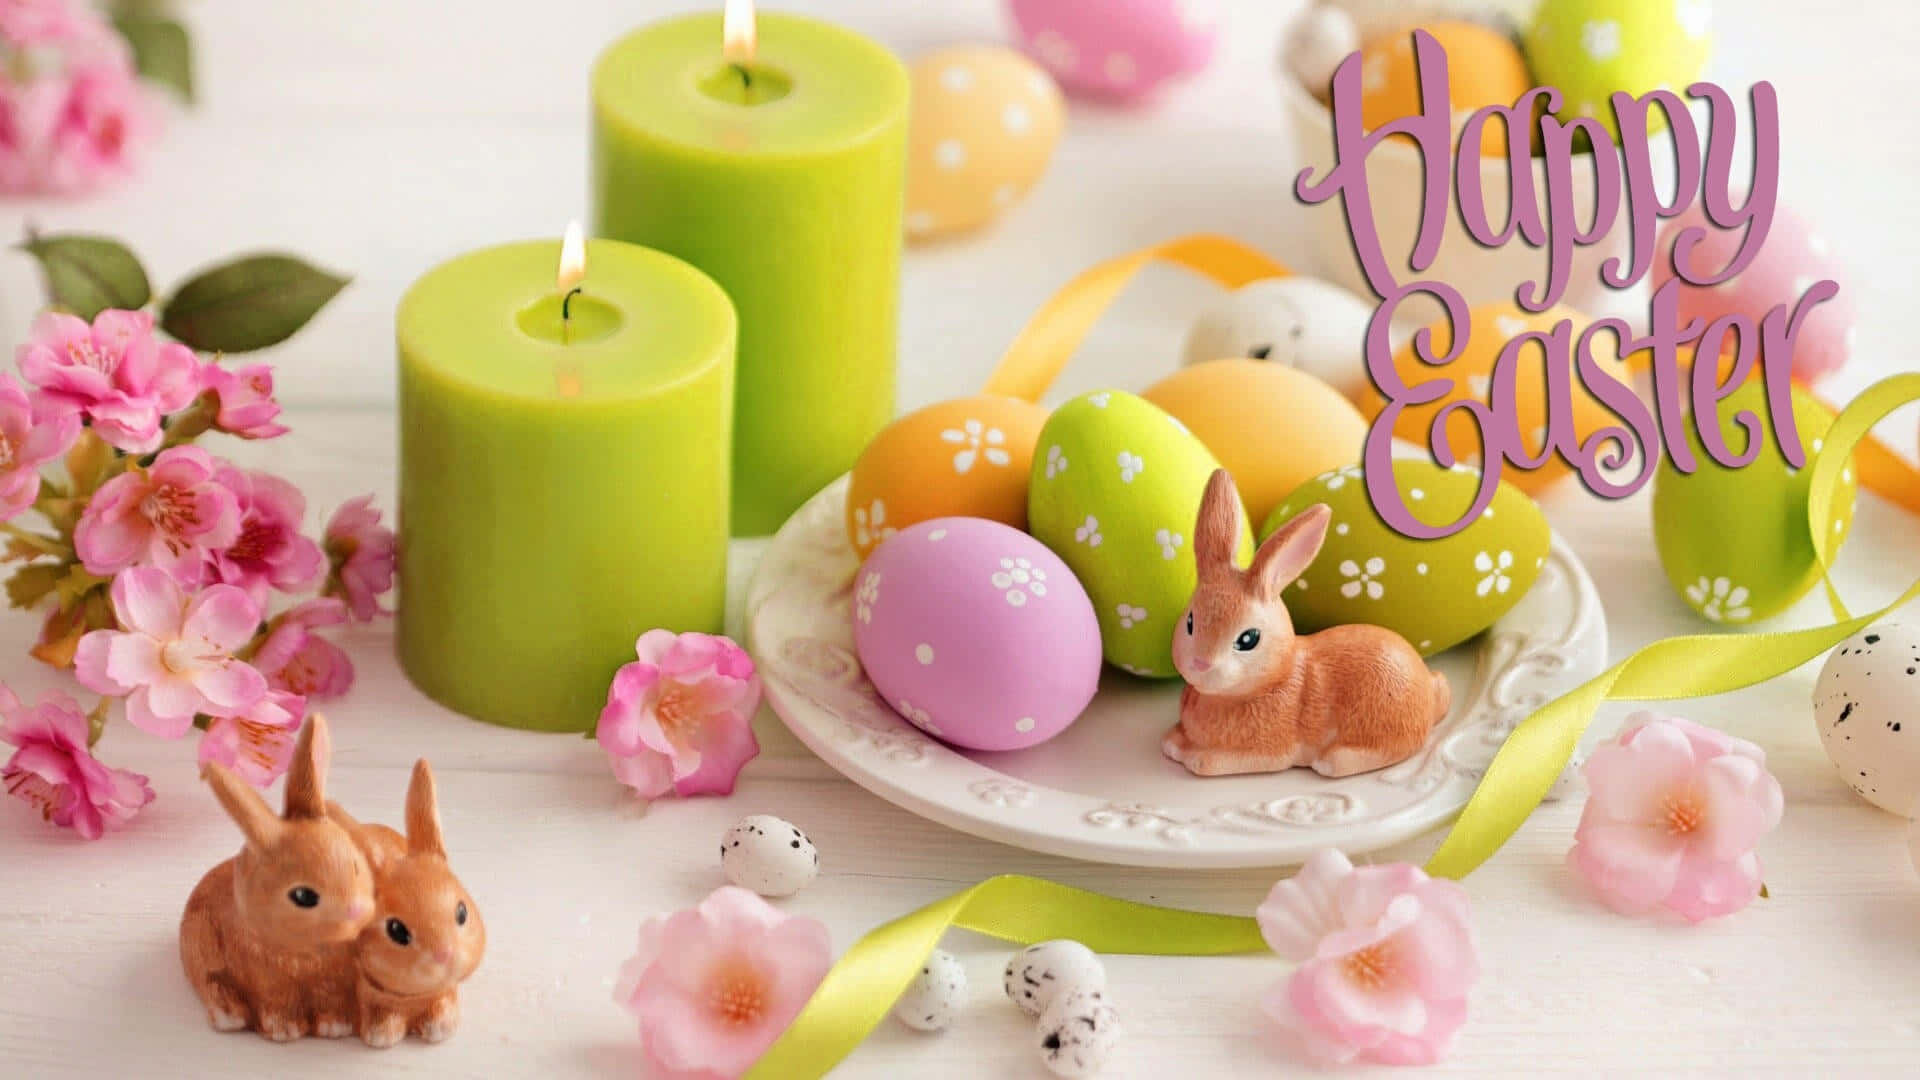 Adorable Easter Background with Easter Eggs and Bunnies